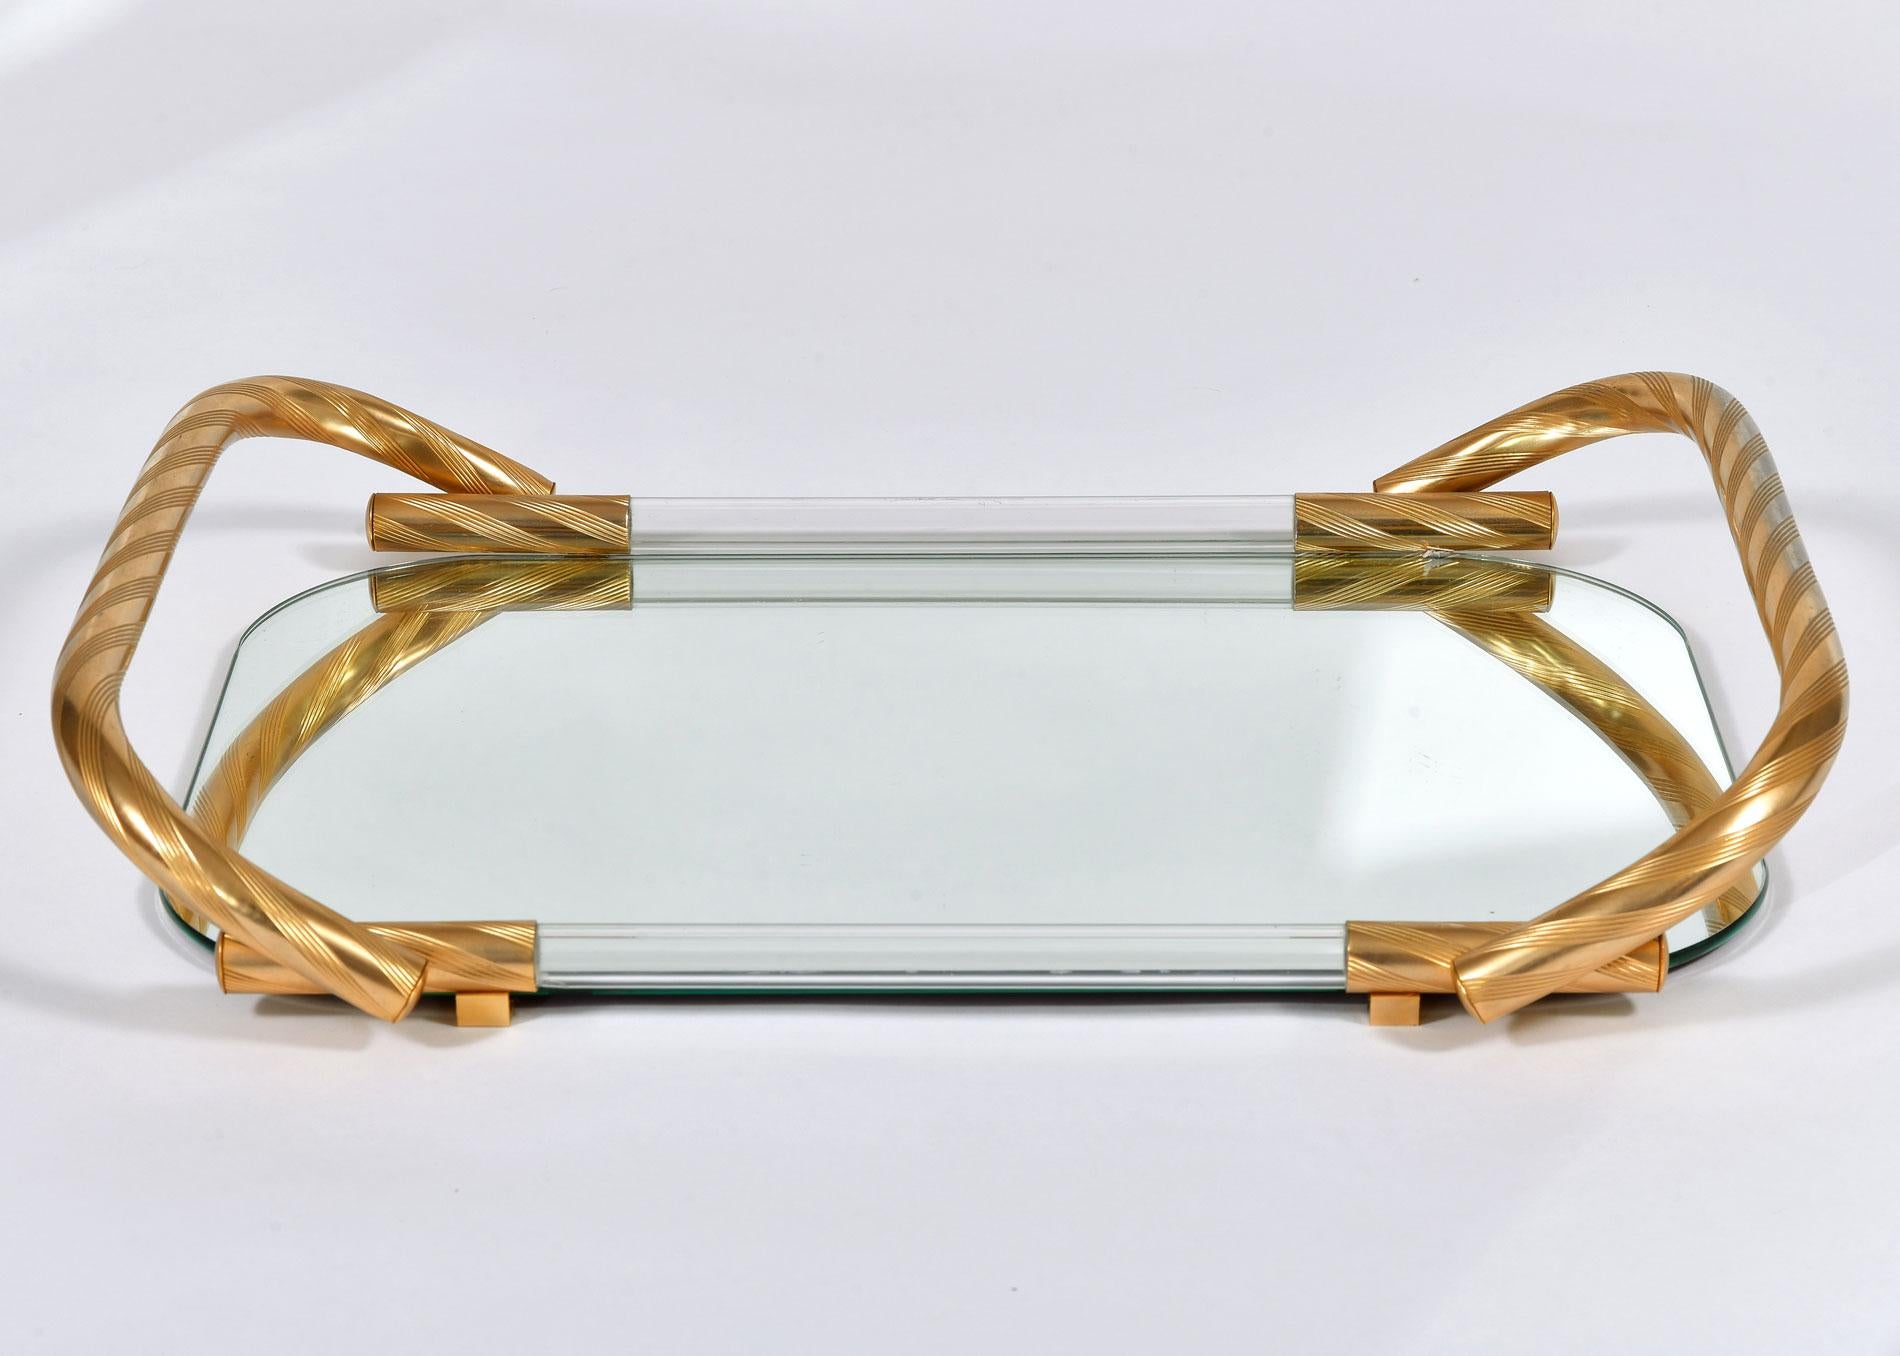 1970s rectangular mirrored tray with curved corners and brass rope-twist handles.